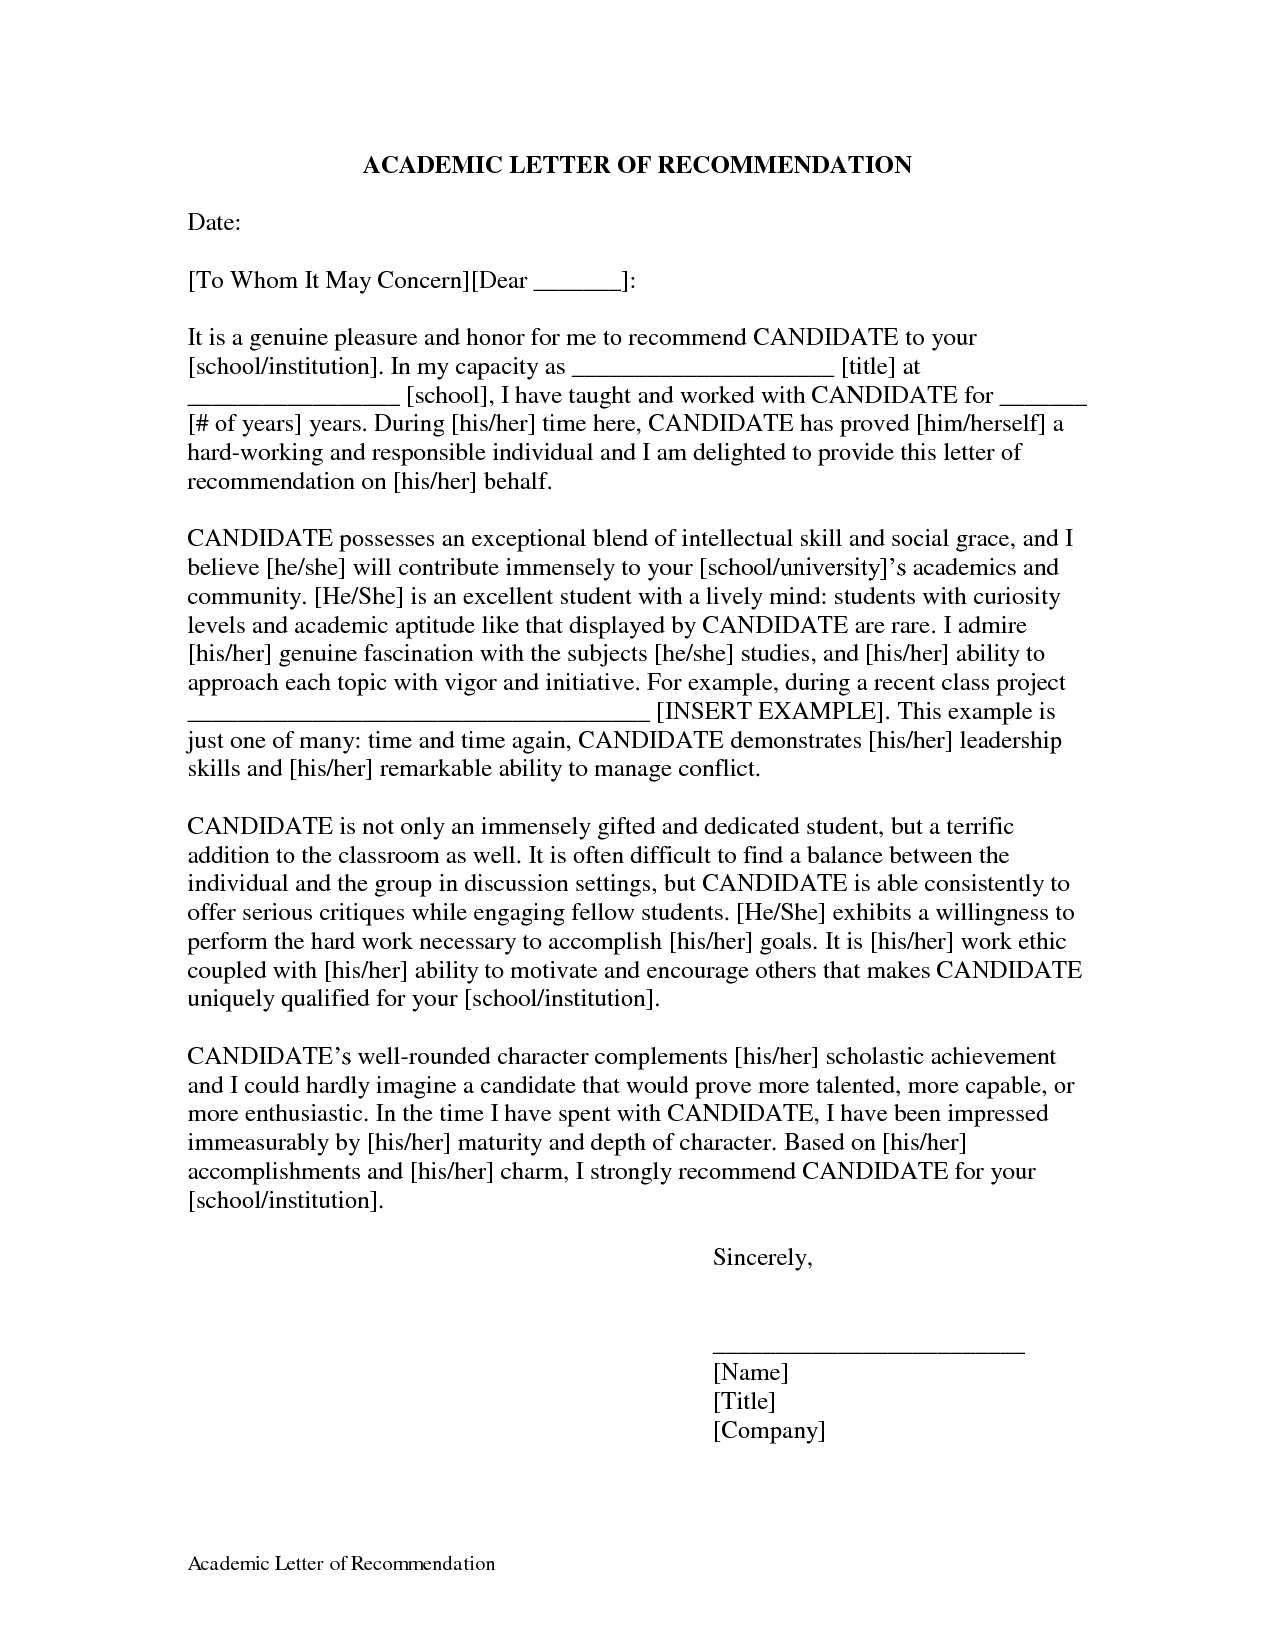 Academic Excellence Letter Of Recommendation Google Search in dimensions 1275 X 1650